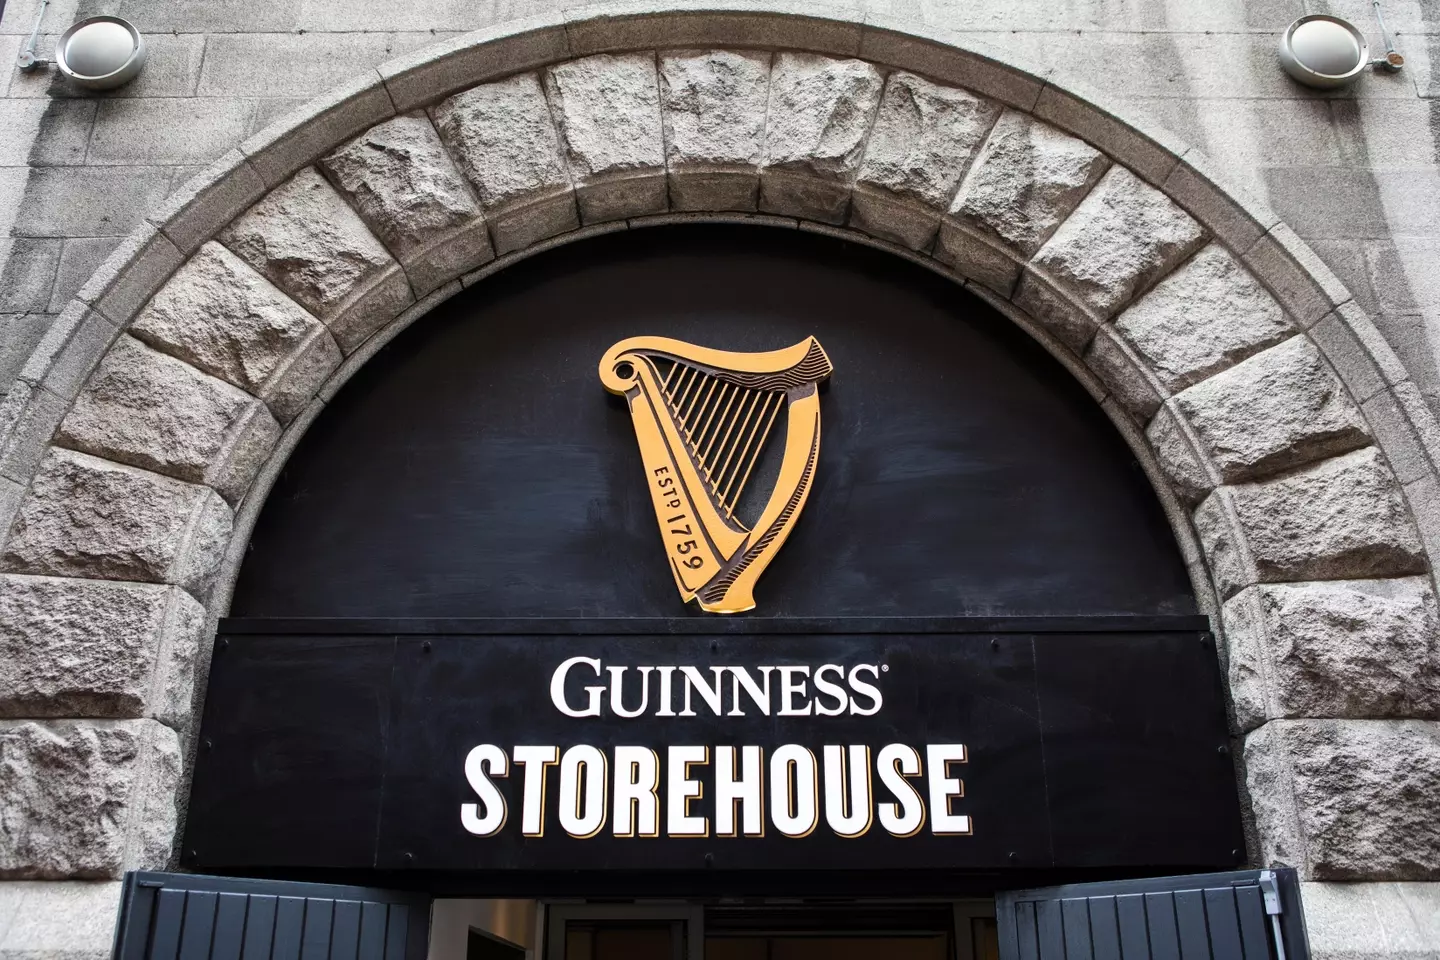 A beer specialist at the Guinness Storehouse has explained why the Irish stout tastes so much better in Dublin.